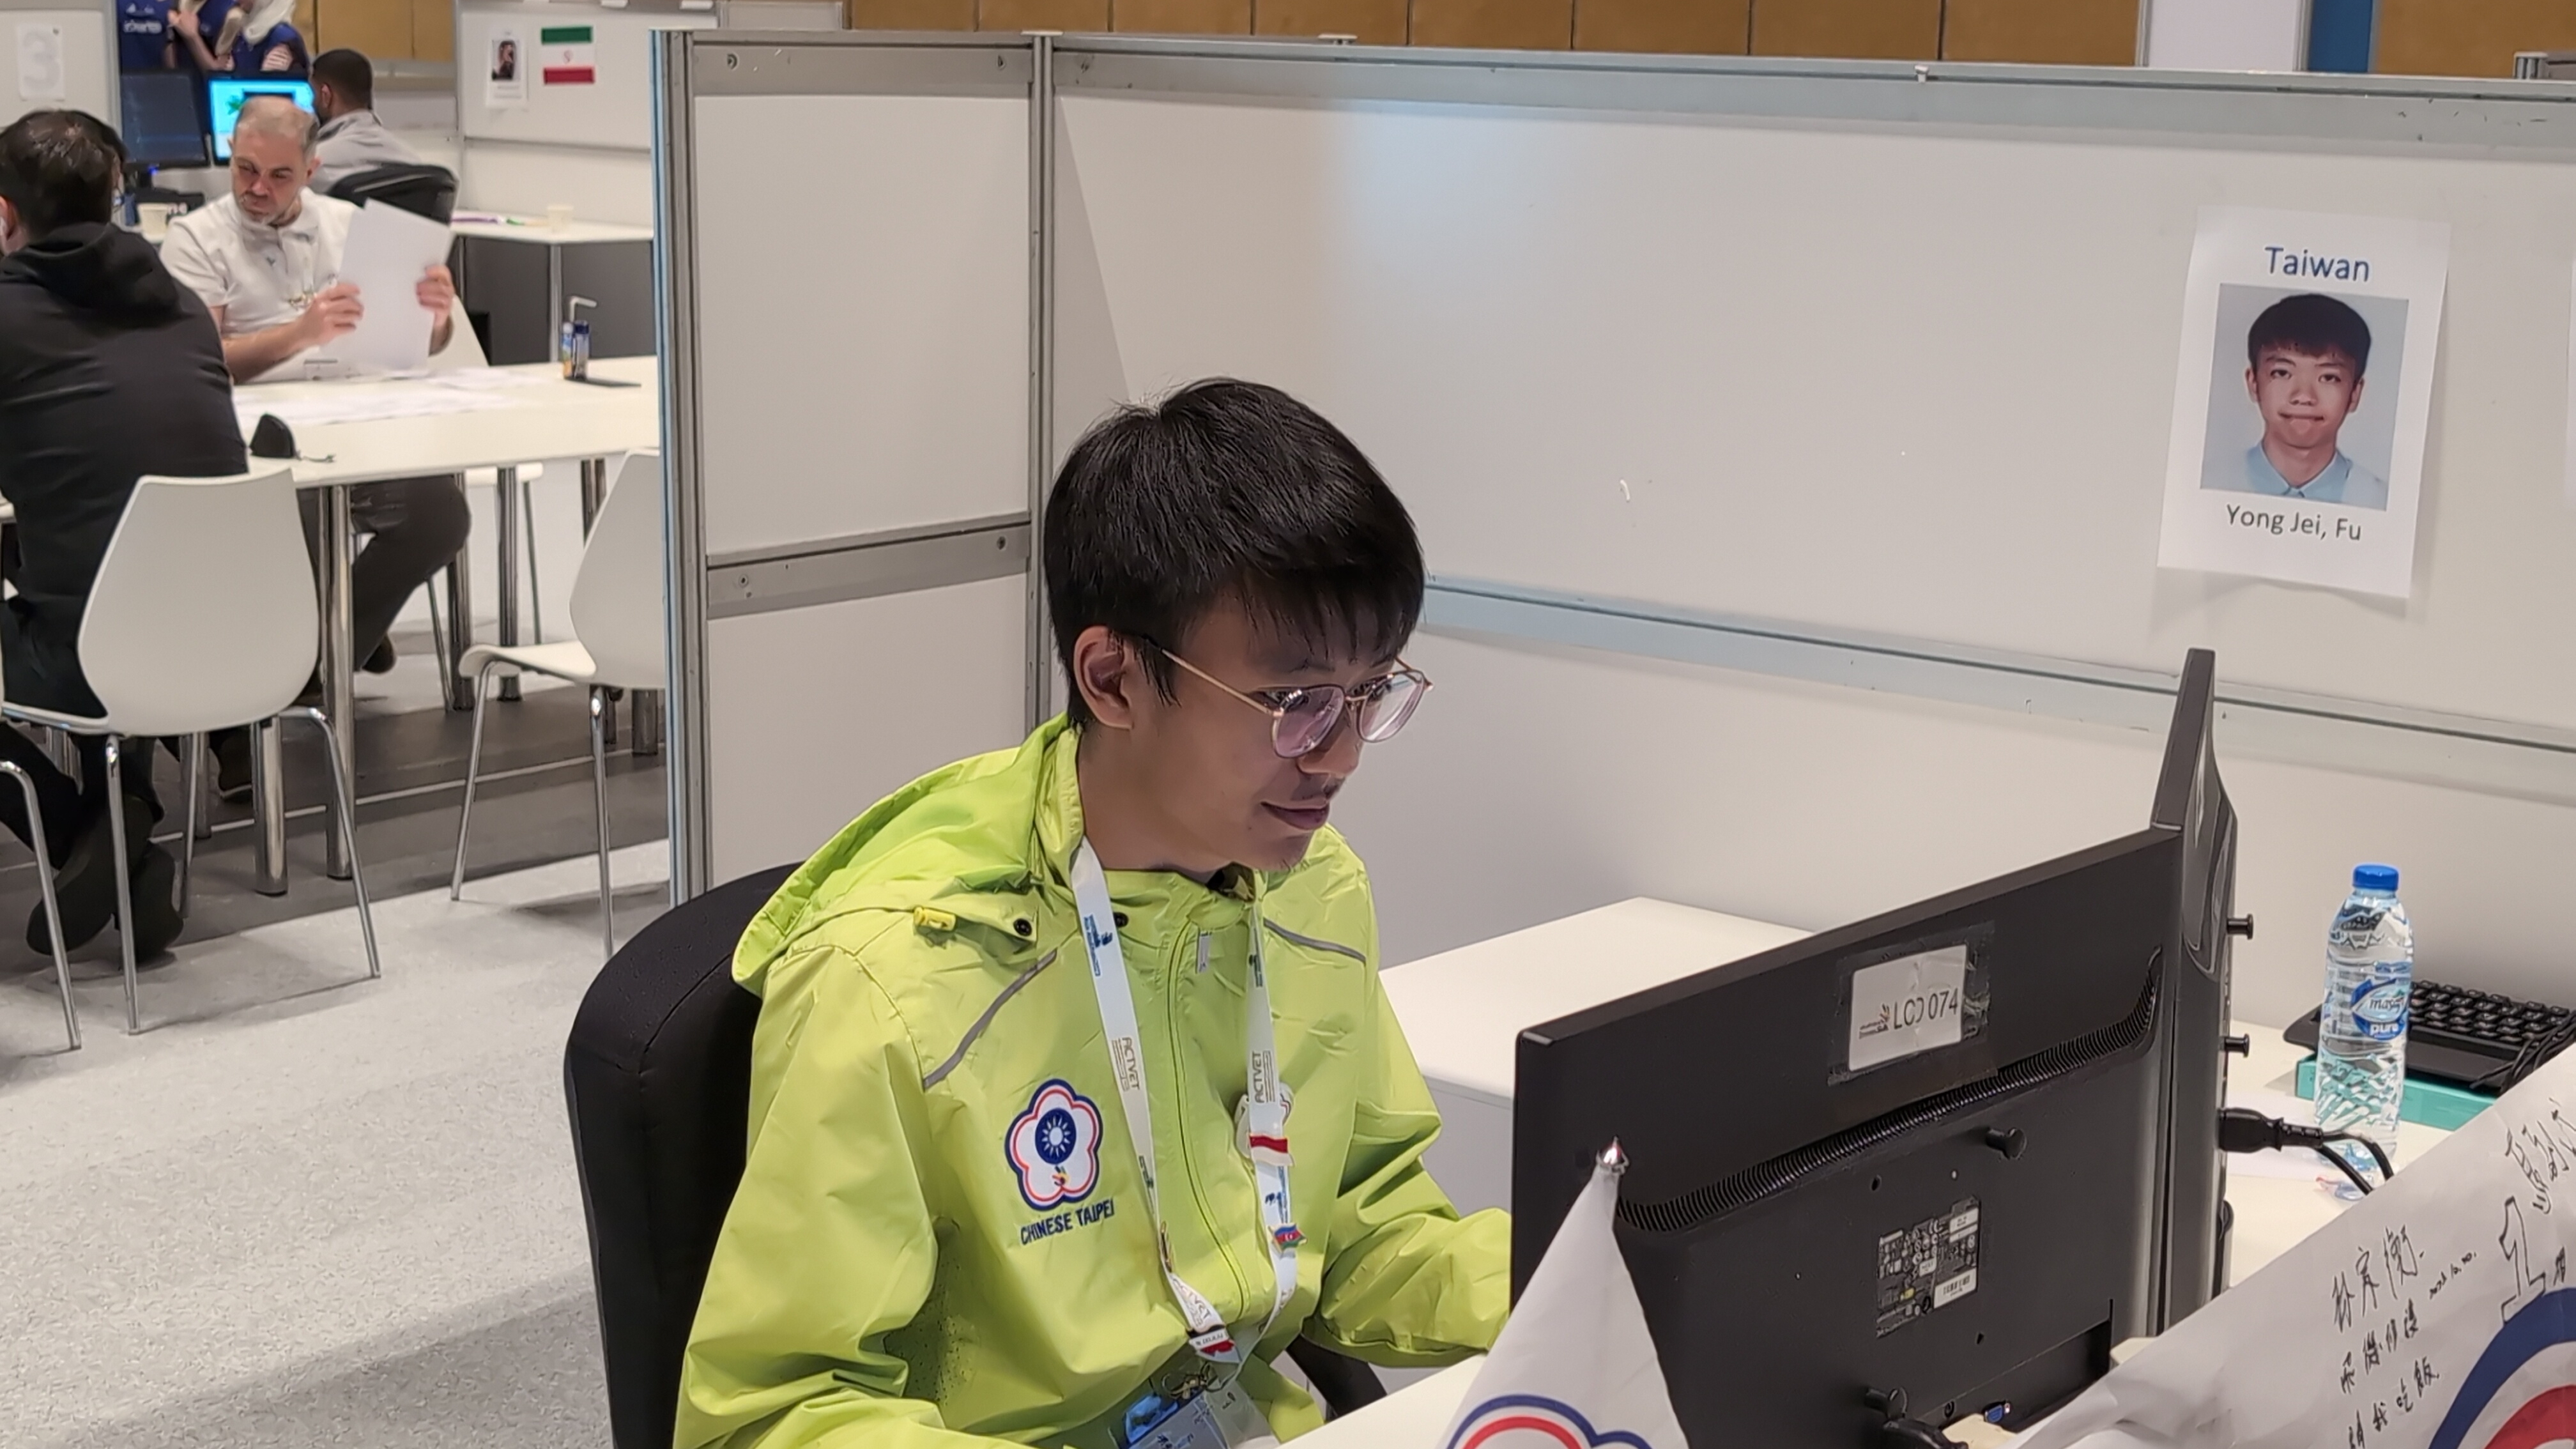 Yong-Jie Fu, a fourth-year student majoring in Computer Science and Information Engineering, focused on solving problems on the competition field and eventually clinched the silver medal in the Web Technology category.